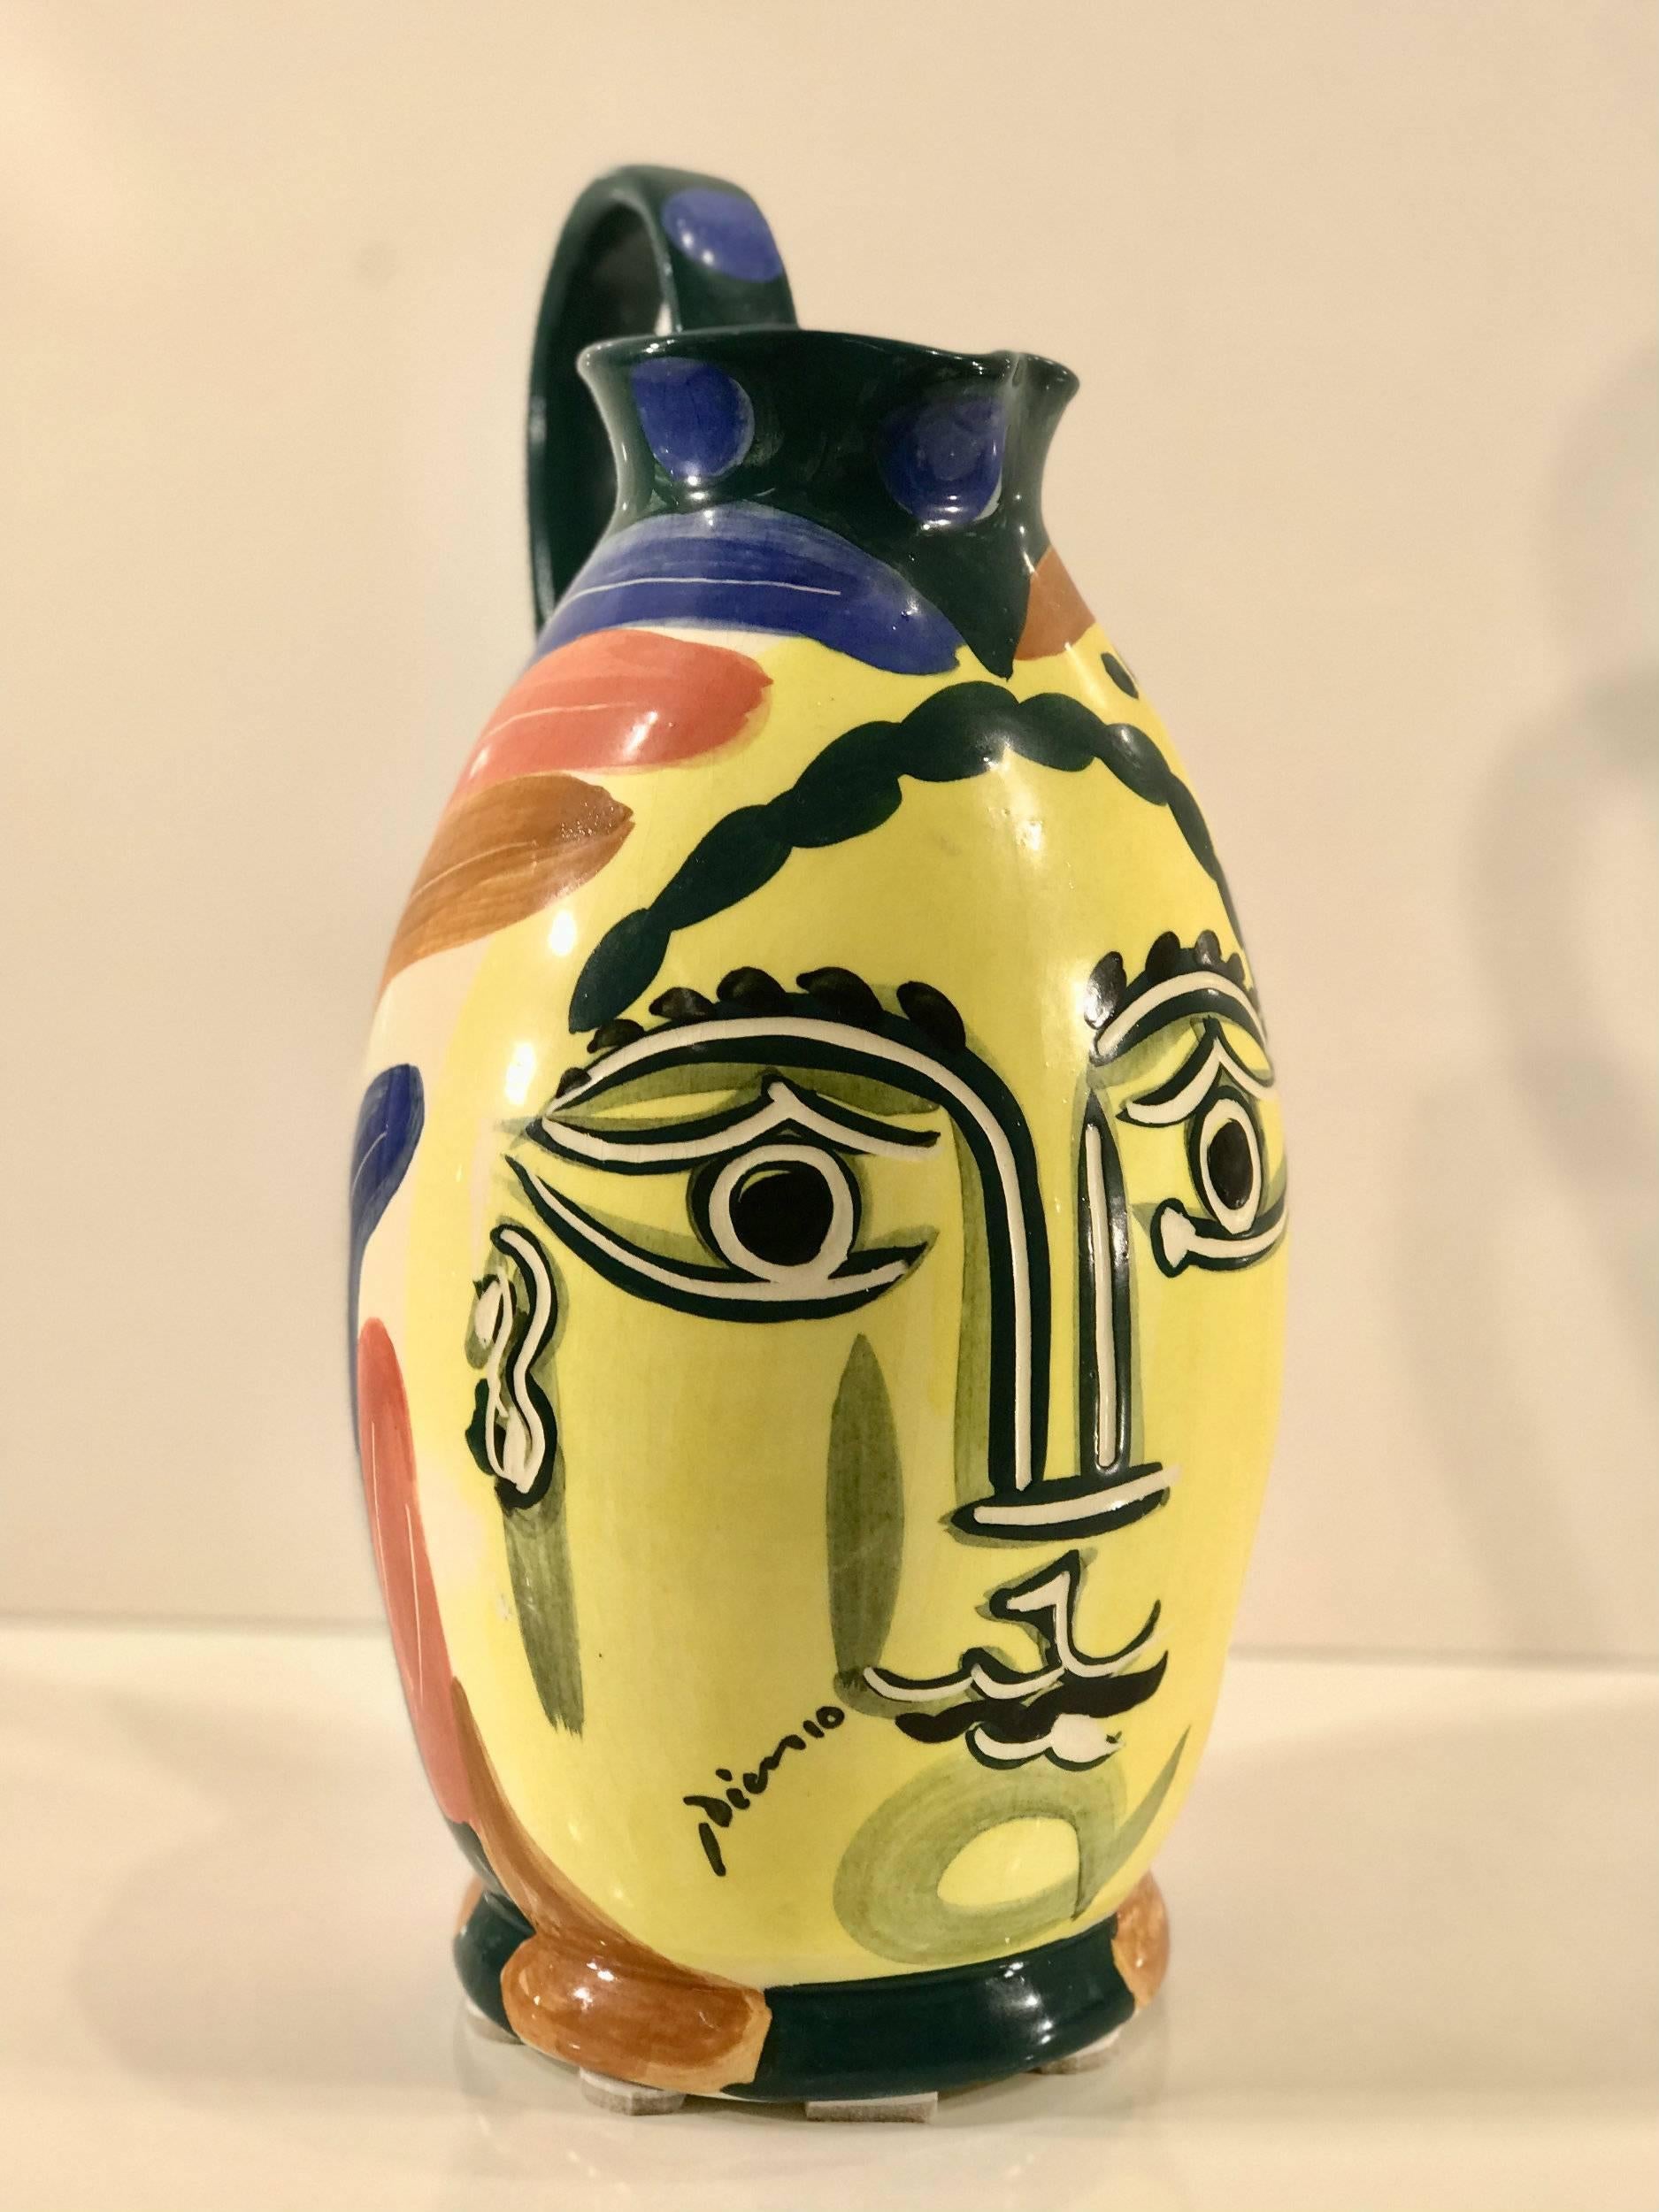 After Picasso 'Femme Du Barbu' Pottery Pitcher, Signed under the glaze lower left
Stamped edition Picasso Padilla, Mexico- 58A/500- Incised 193
Large colorful well-decorated work. 15 inches high, diameter of body 8 inches,
measures 10 inches wide